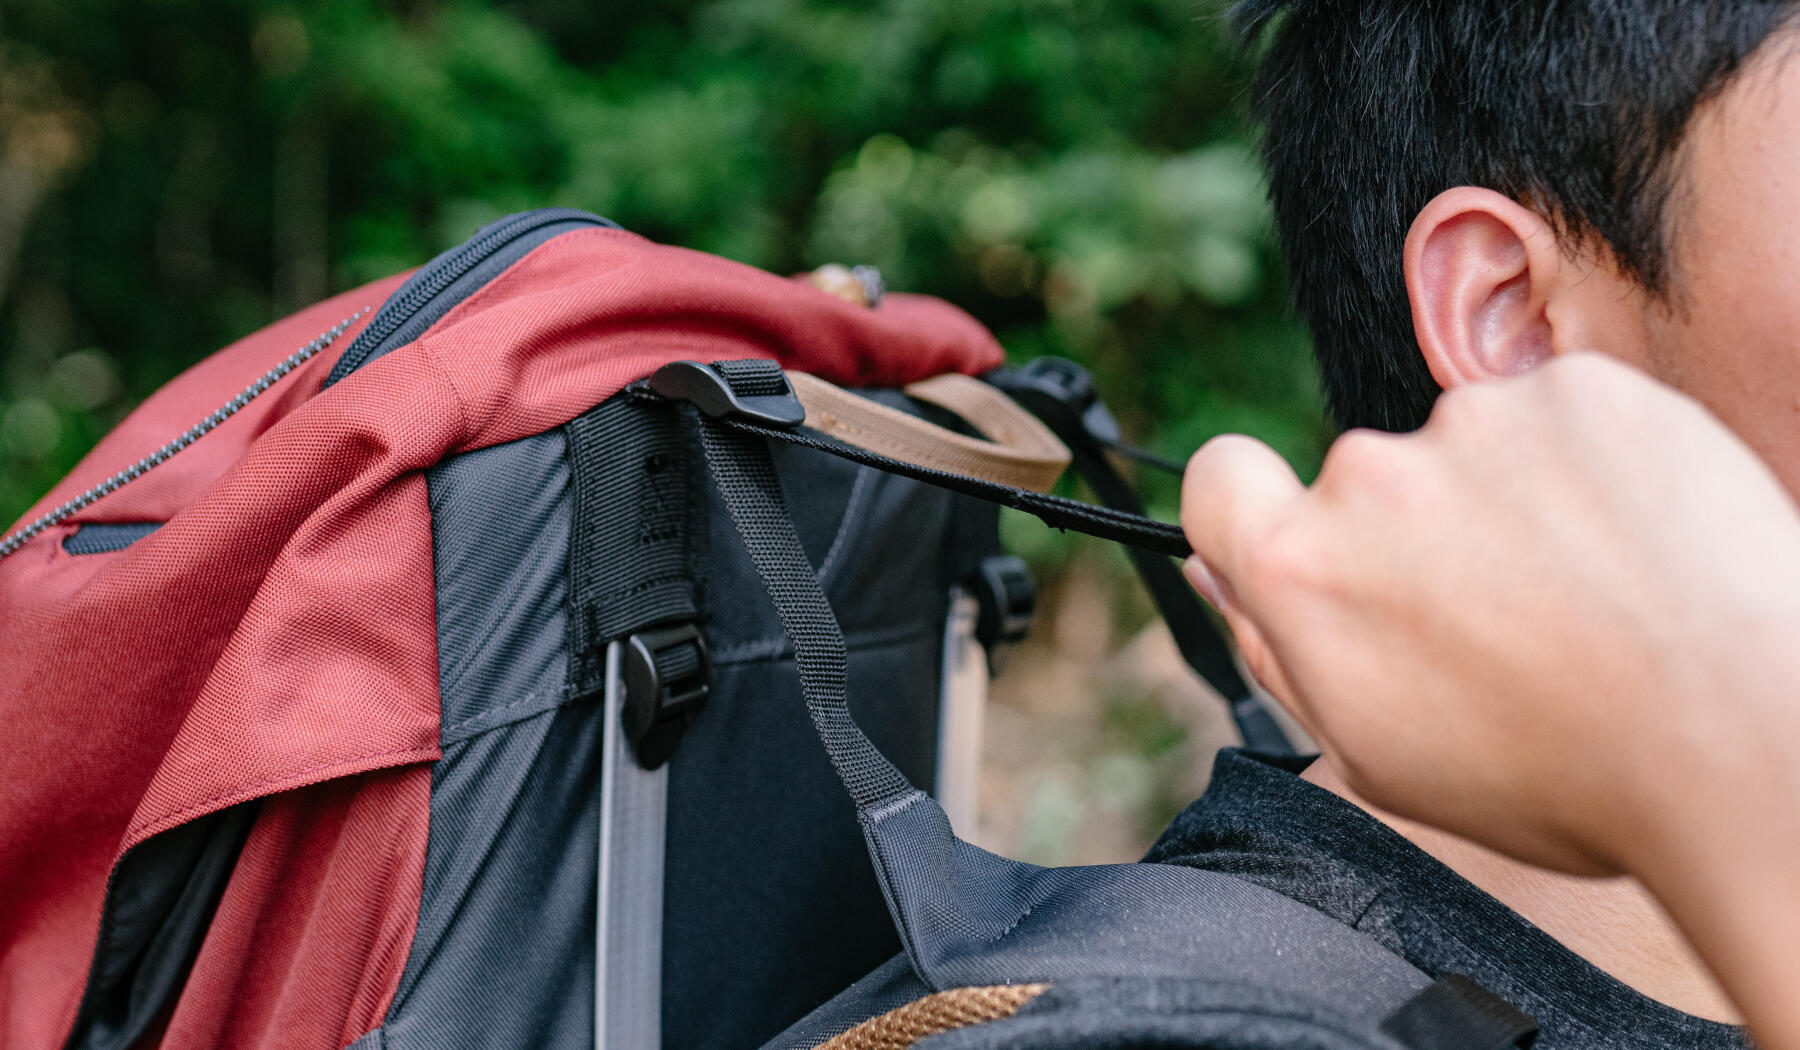 How to adjust your backpack